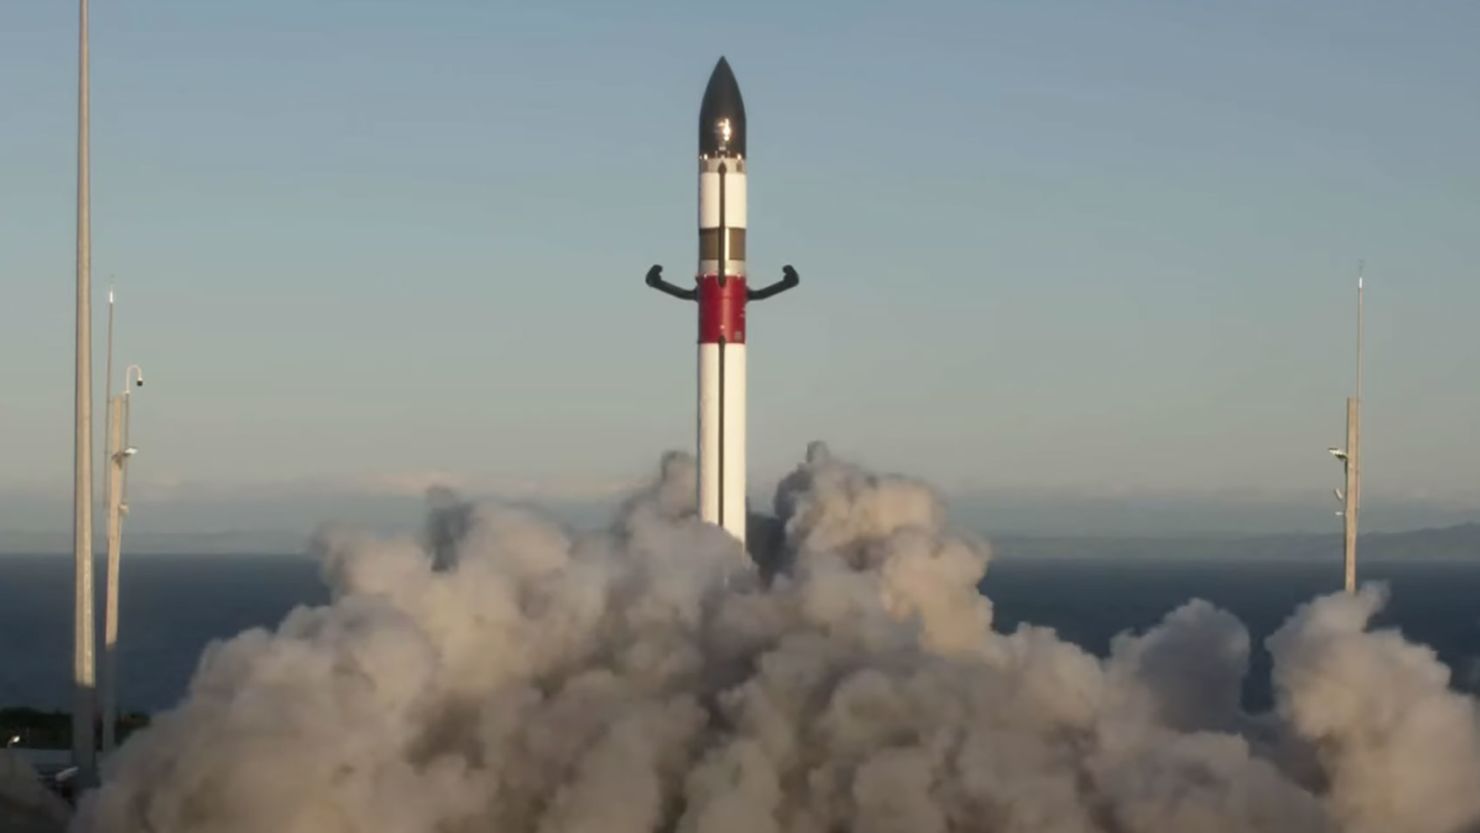 Rocket Lab's Electron rocket takes off from its launchpad in New Zealand on November 4. Post-launch, the company attempted to recover the rocket booster midair without success.